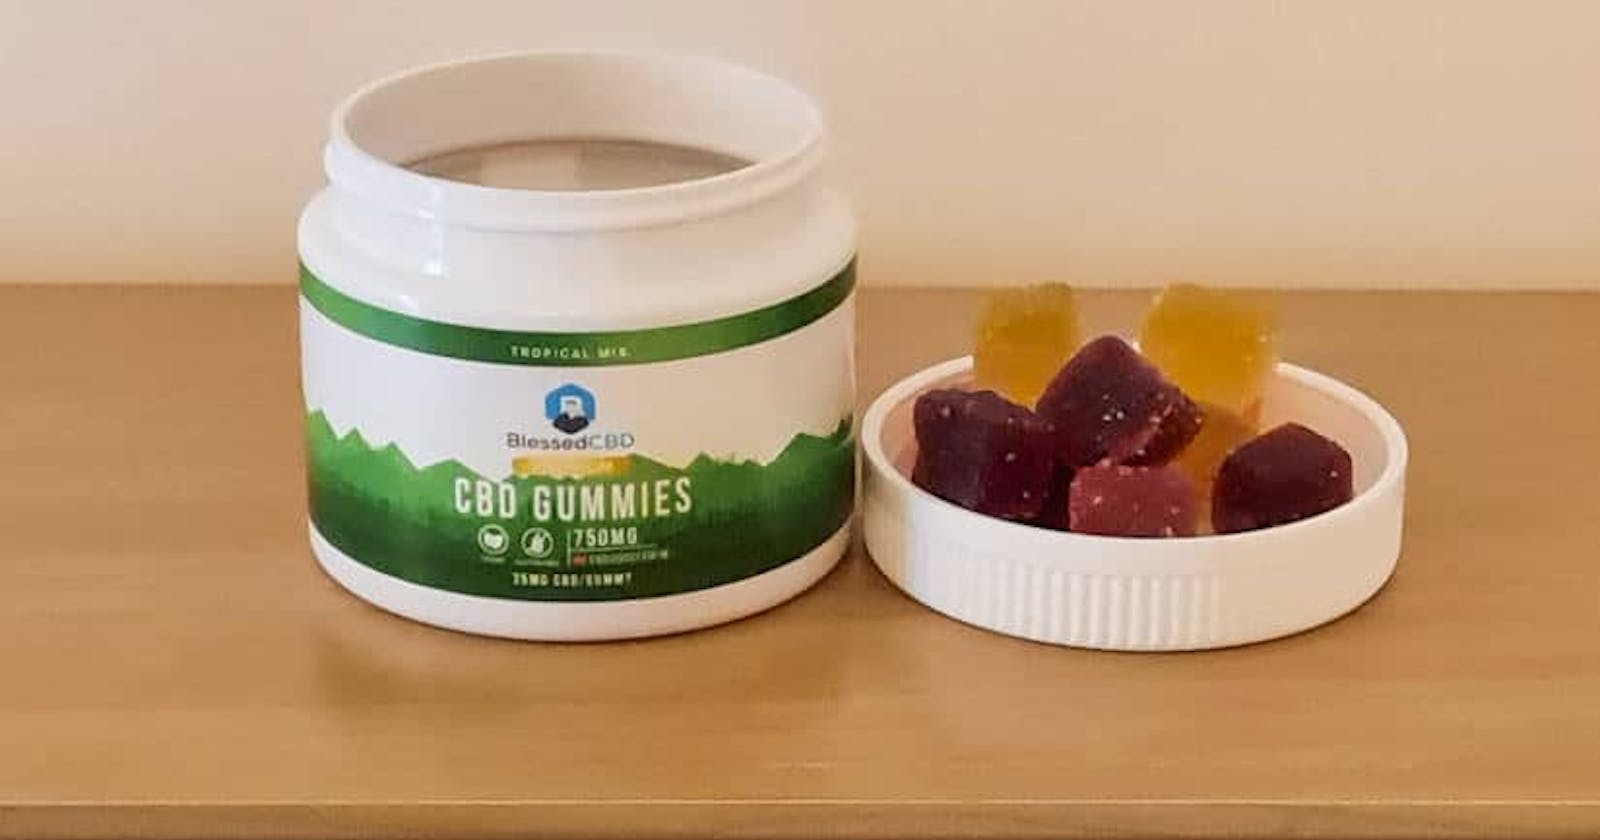 Blessed CBD Gummies Reviews, Results, Where To Buy? (UK)